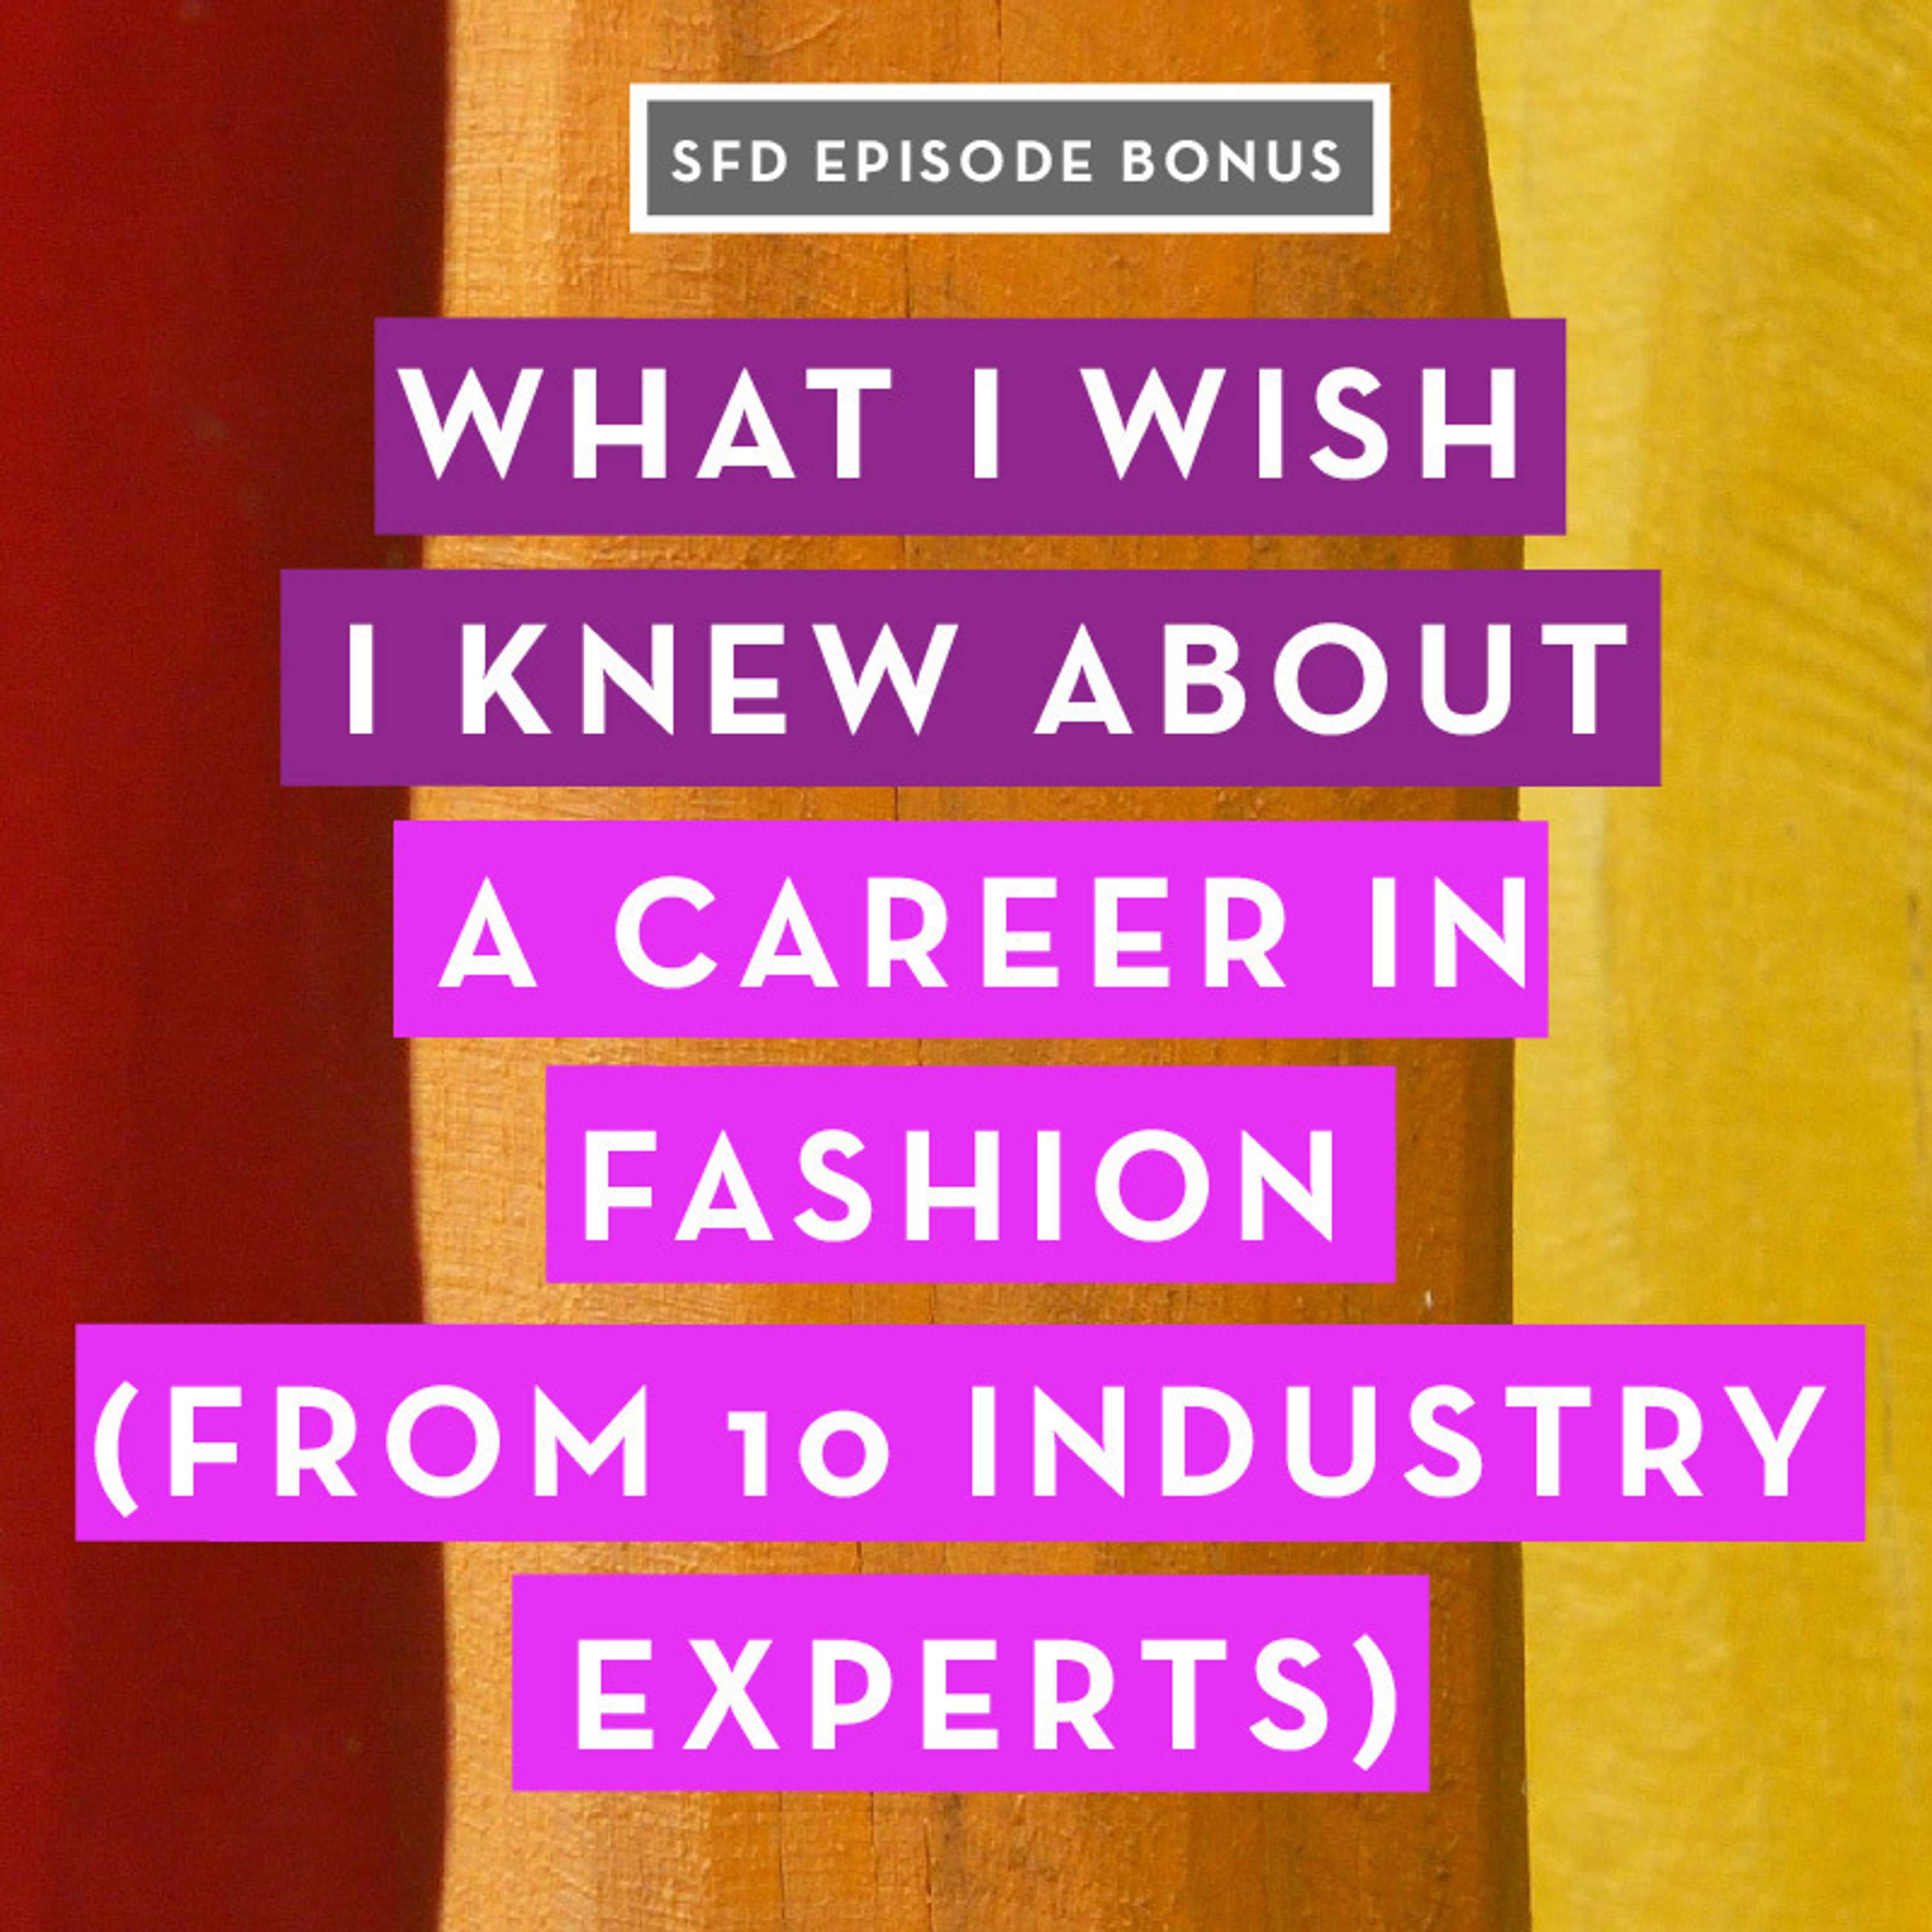 BONUS: What I Wish I Knew About a Career in Fashion (from 10 industry experts)